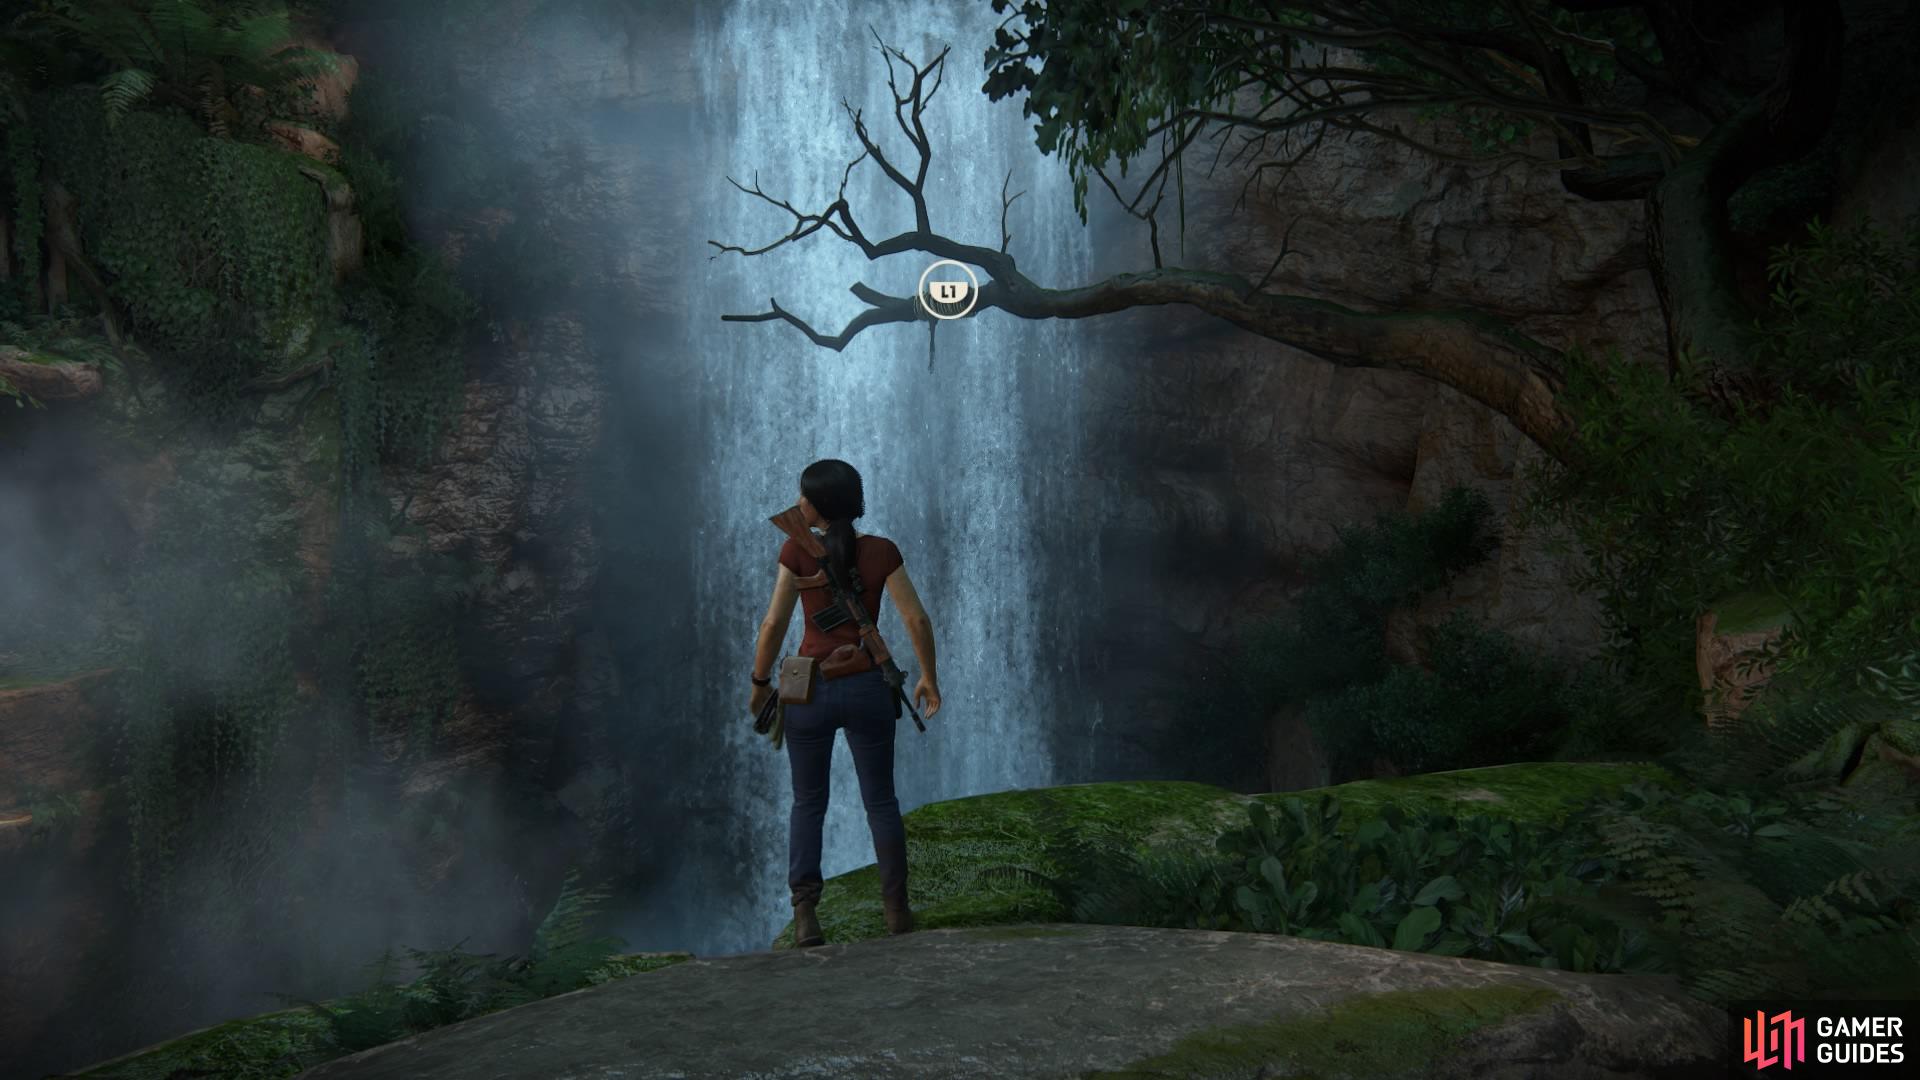 There are multiple rope swing prompts throughout the ascent